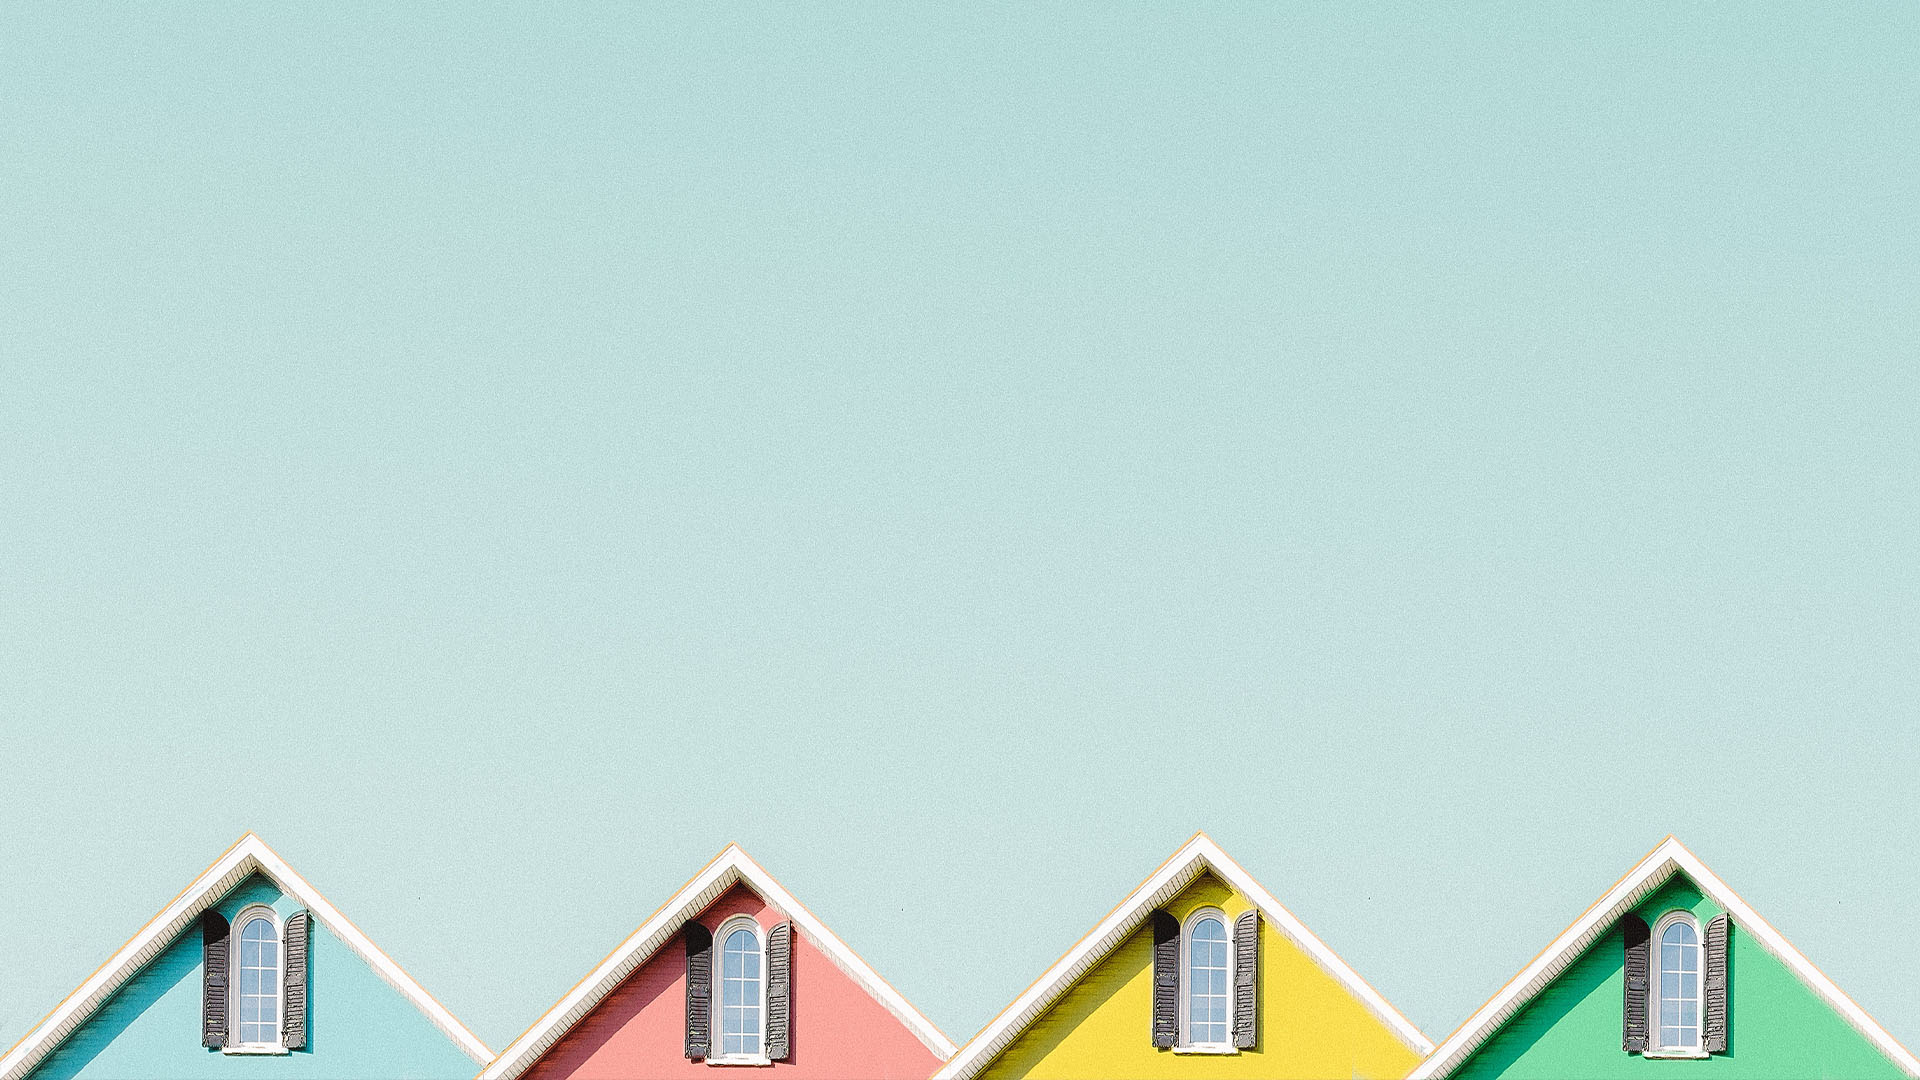 The roofs of four colourful houses in a row on a clear blue day